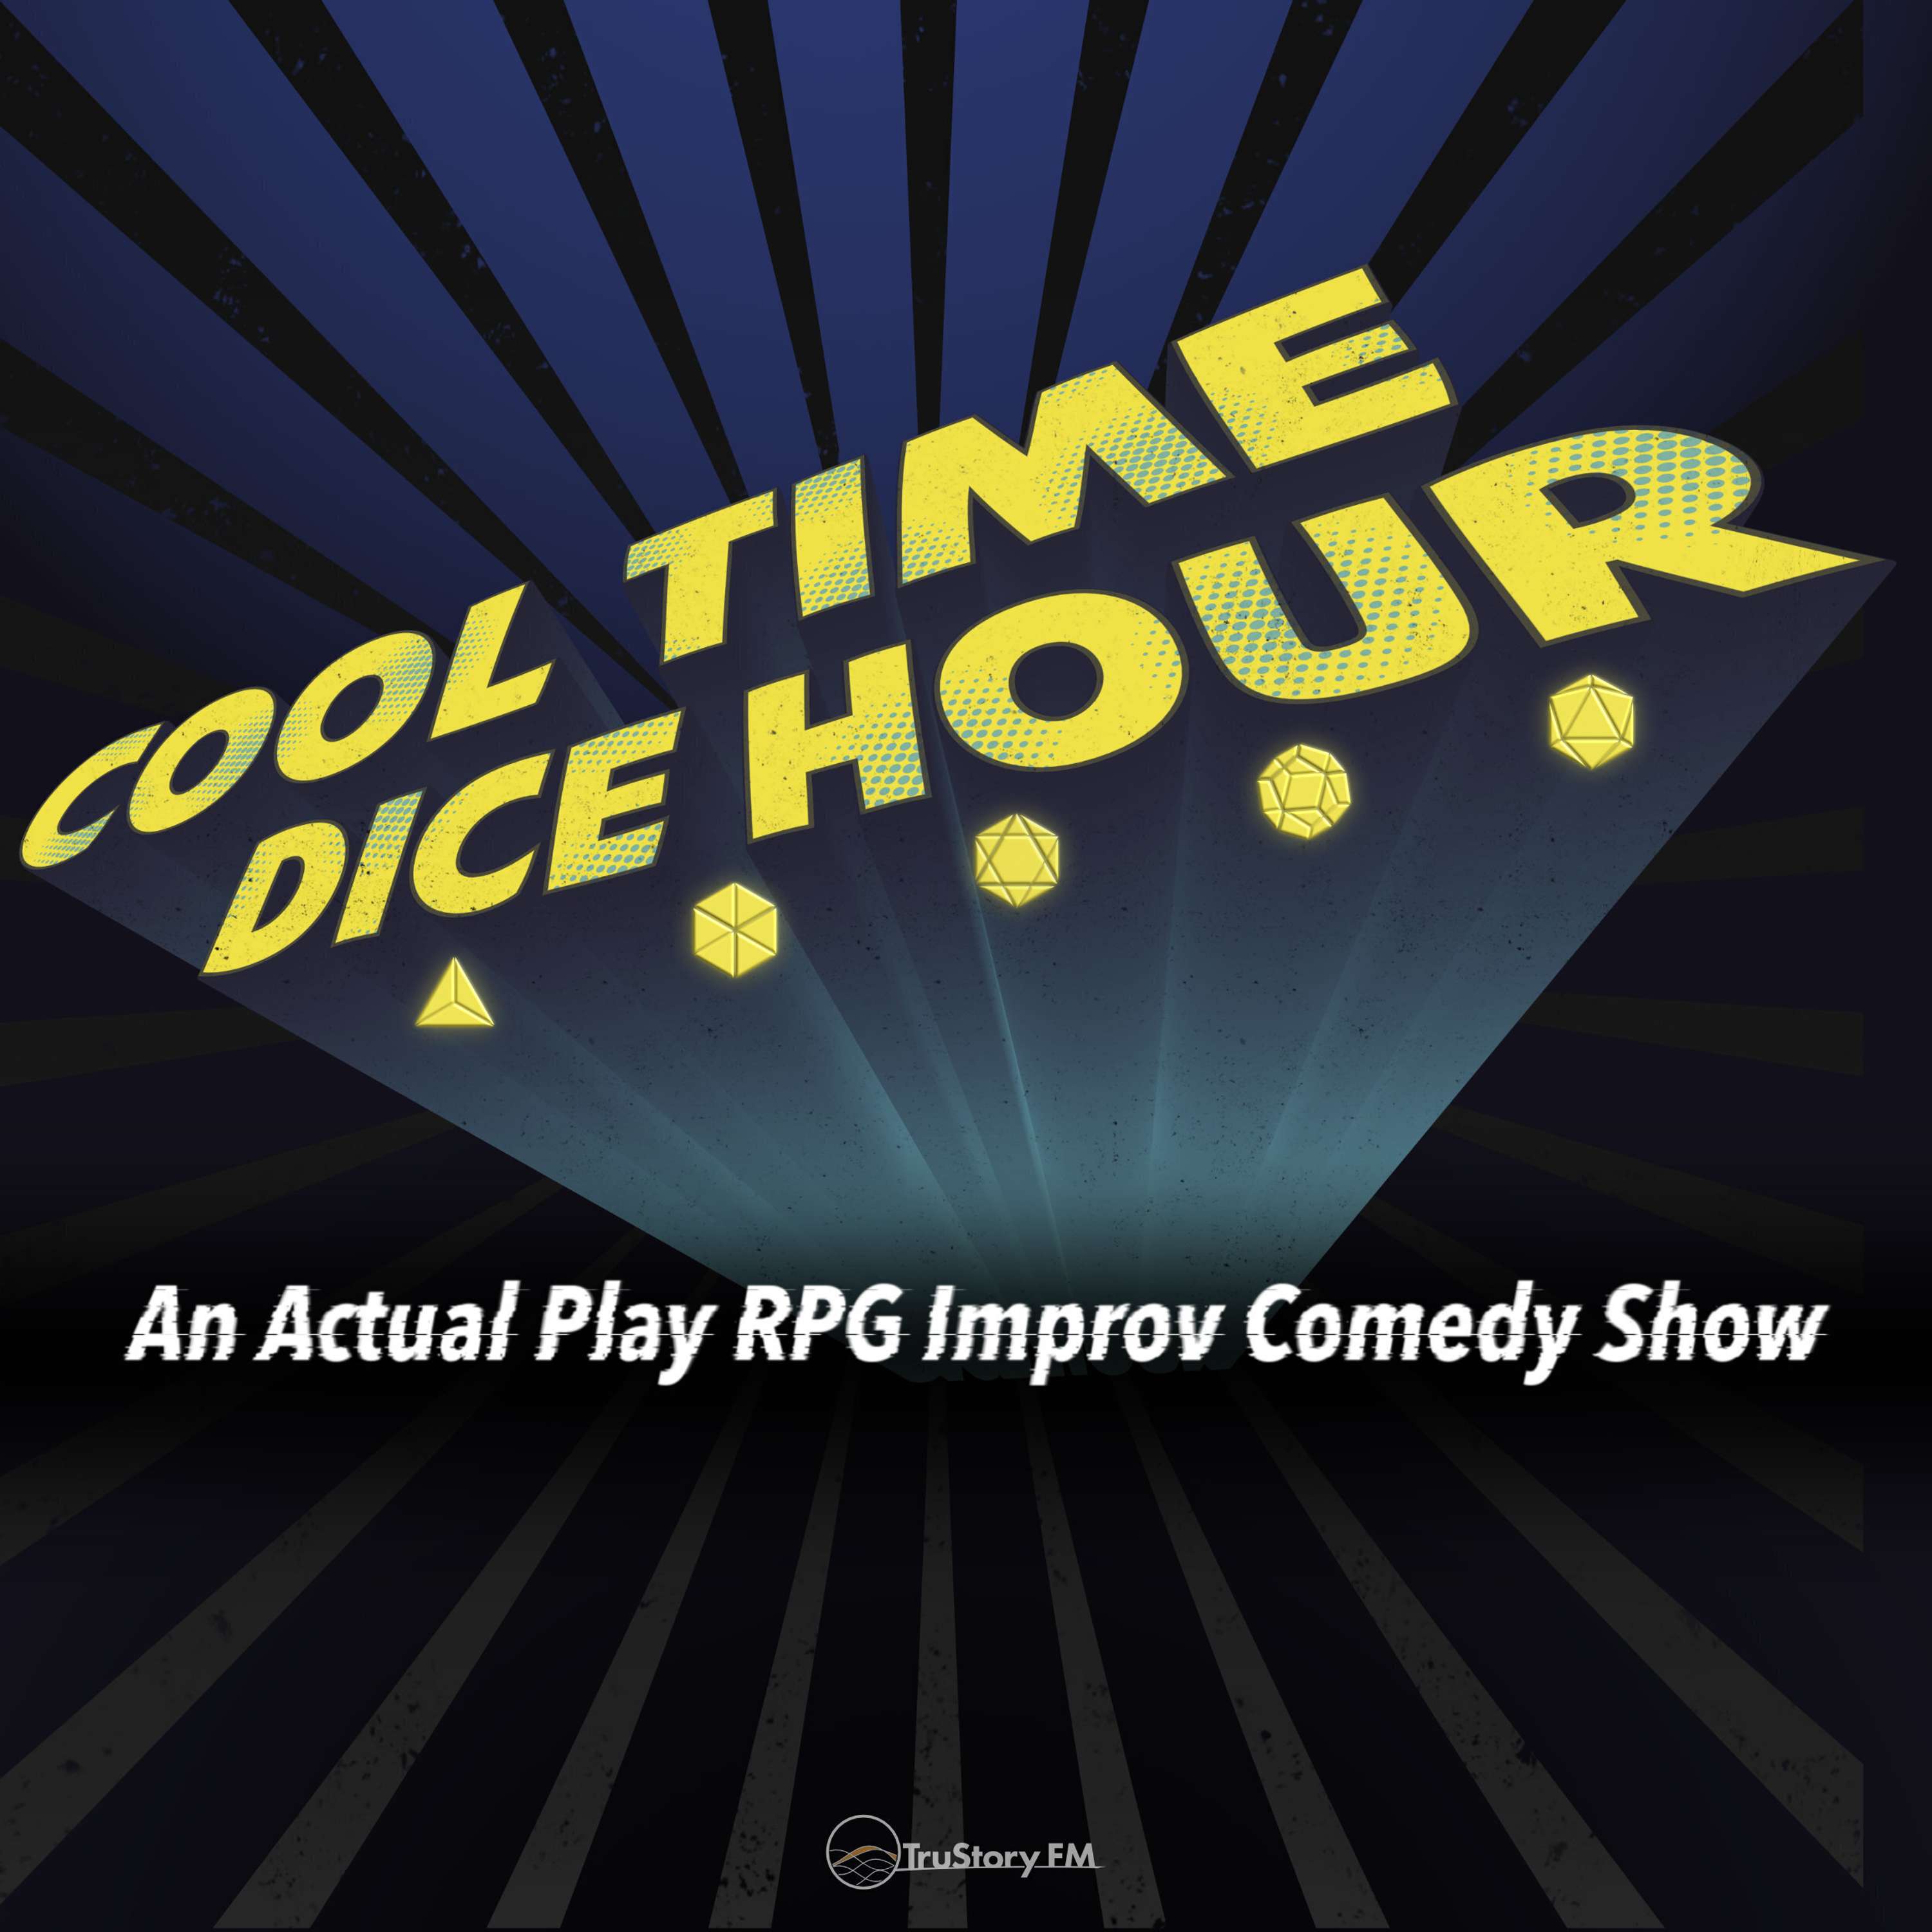 Cool Time Dice Hour!